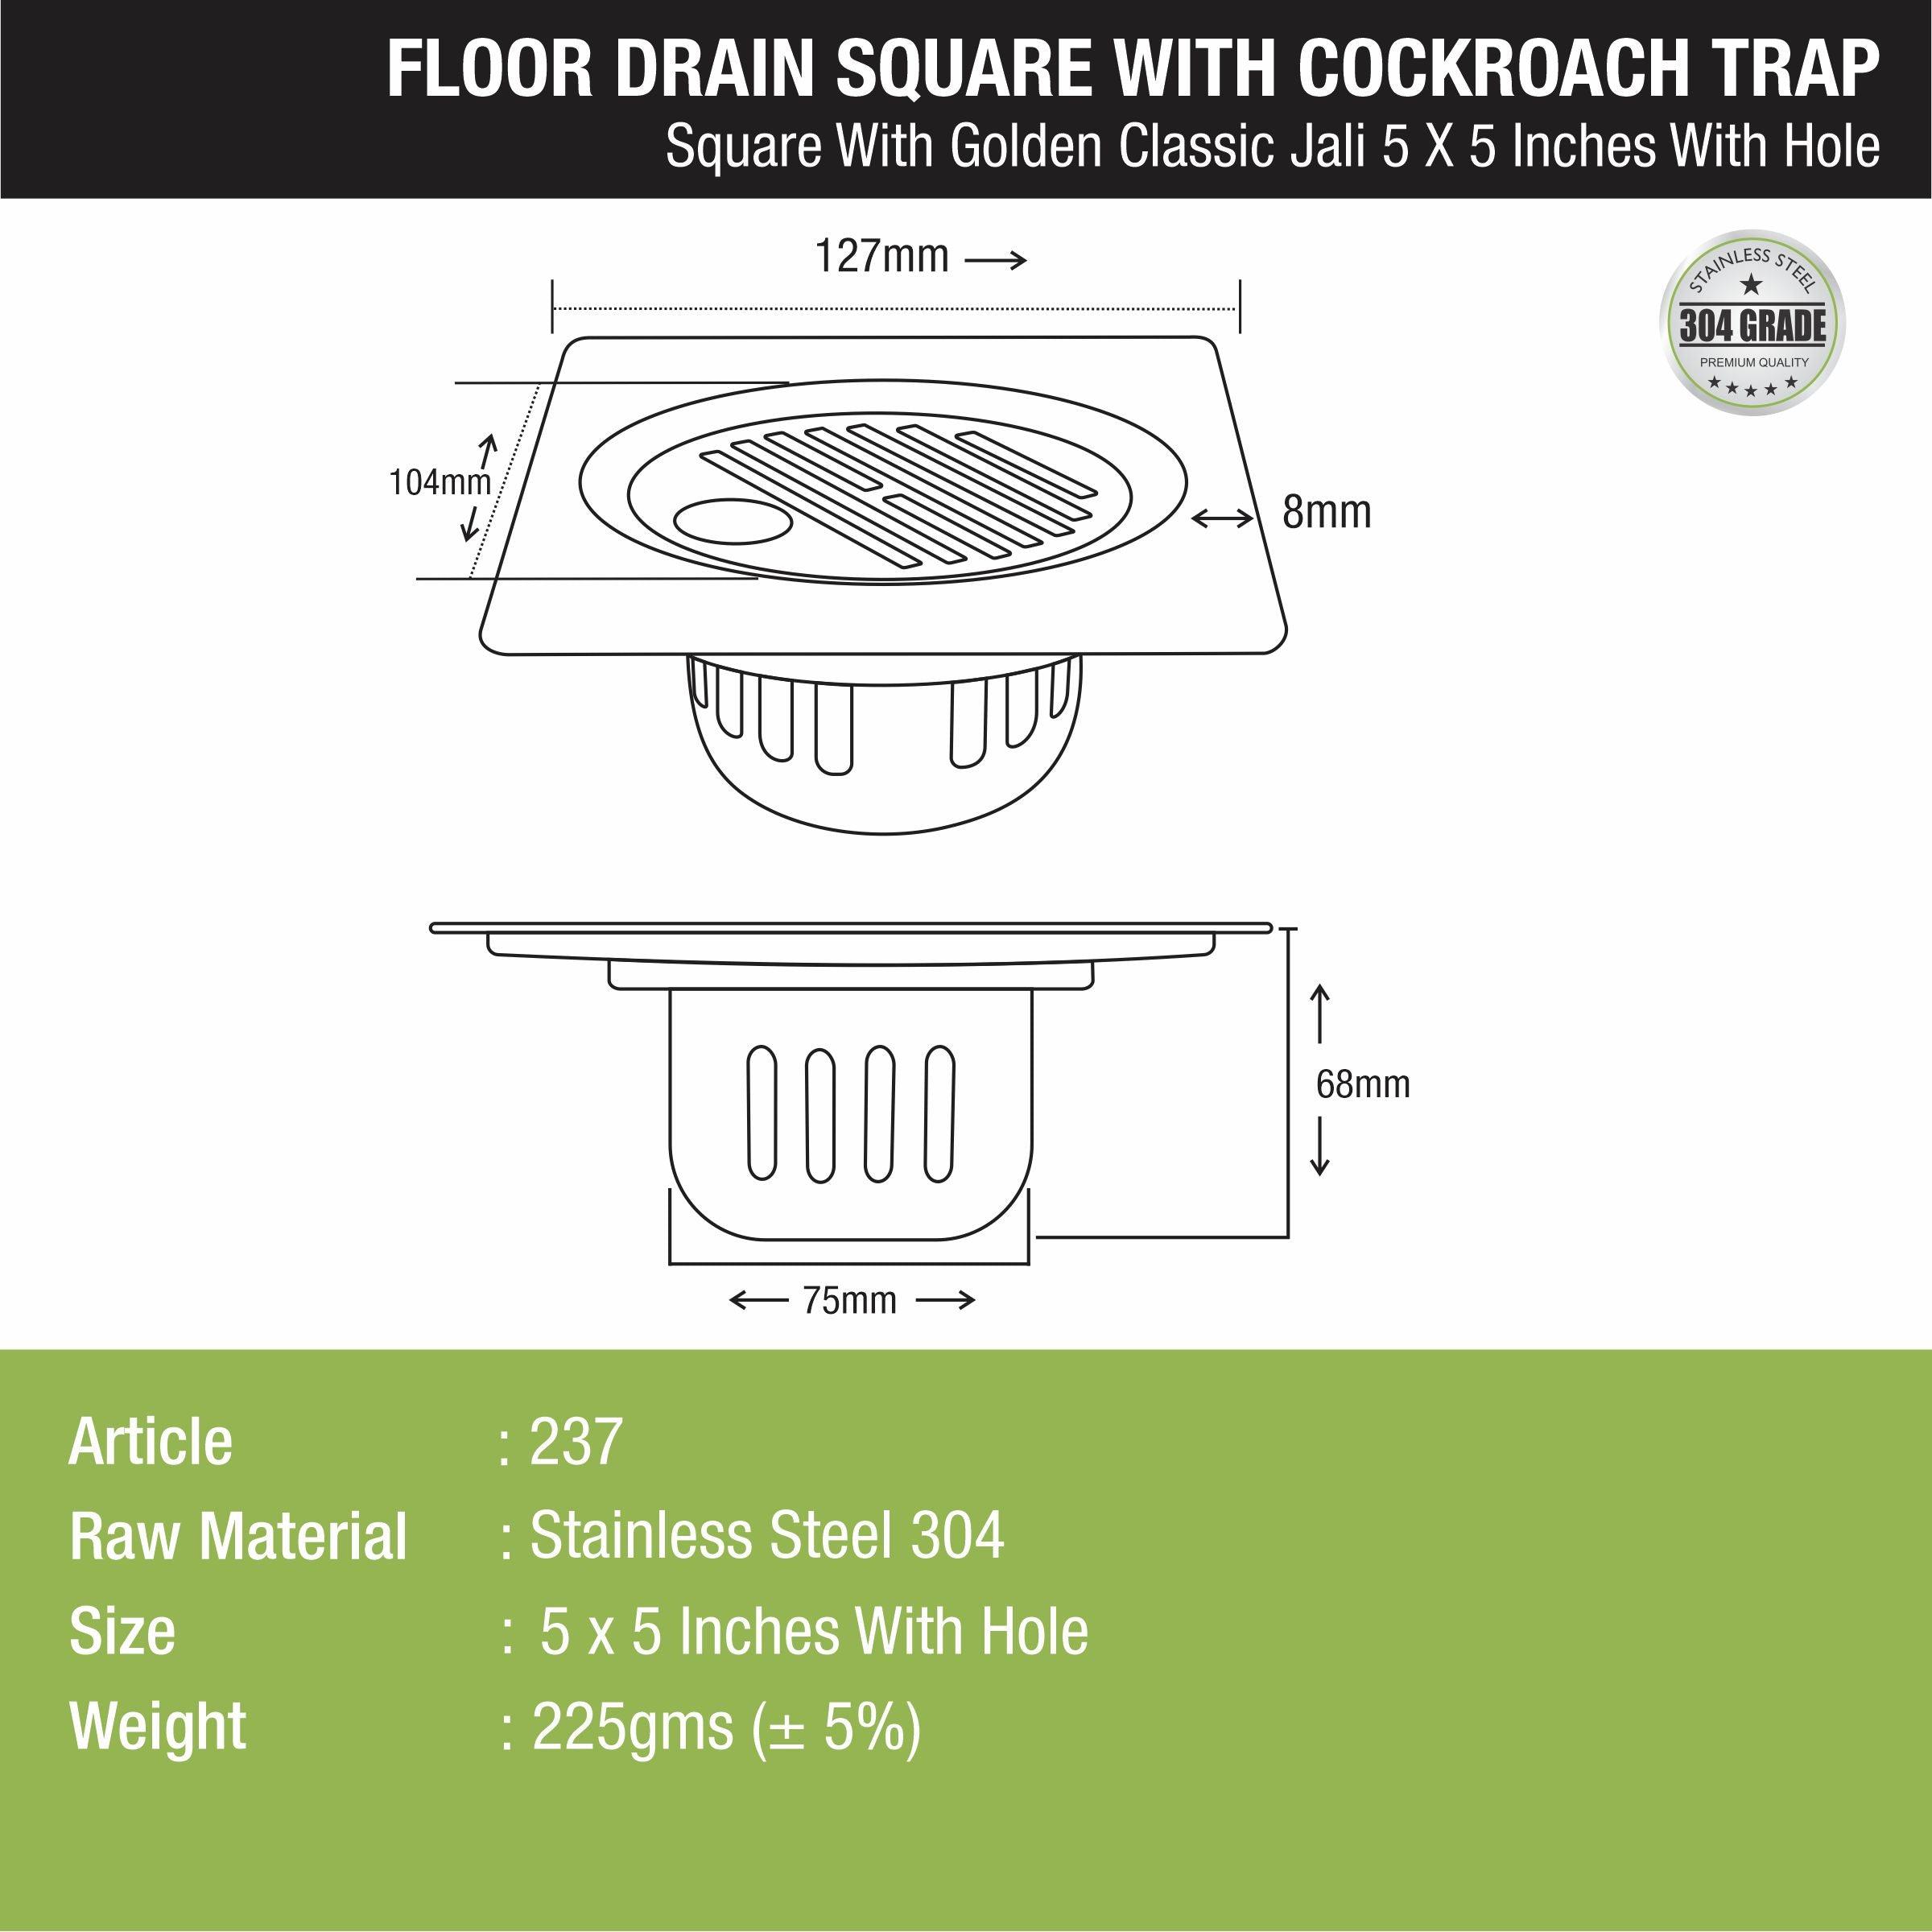 Golden Classic Jali Square Floor Drain (5 x 5 Inches) with Hole and Cockroach Trap - LIPKA - Lipka Home